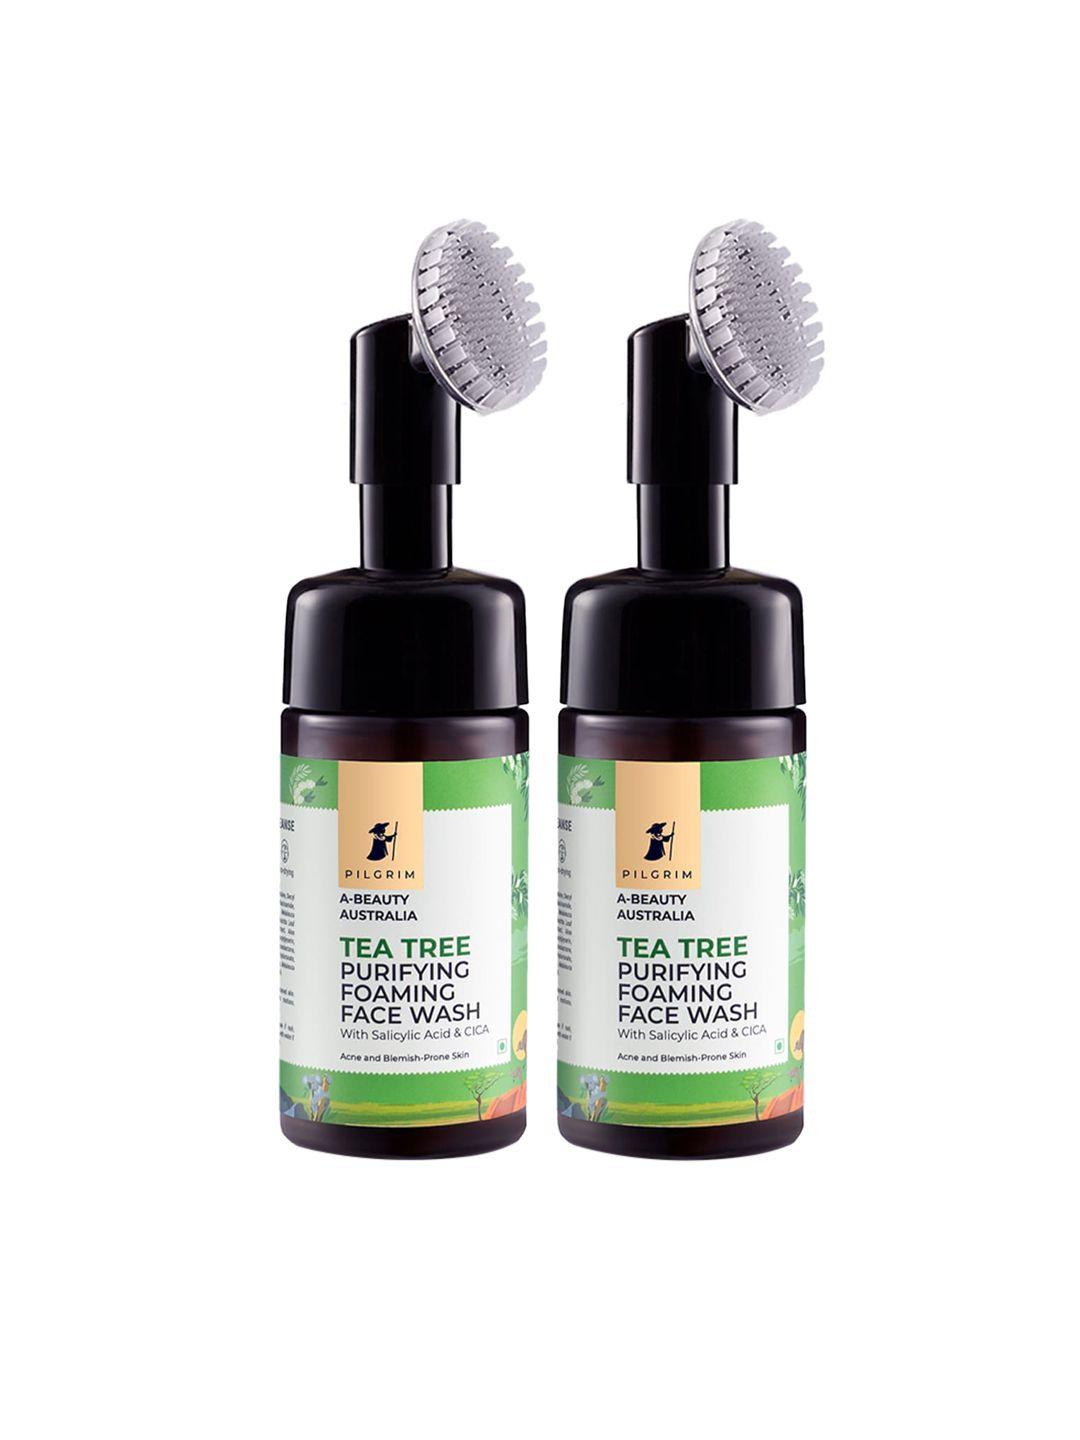 pilgrim pack of 2 purifying foaming face wash - 120 ml each